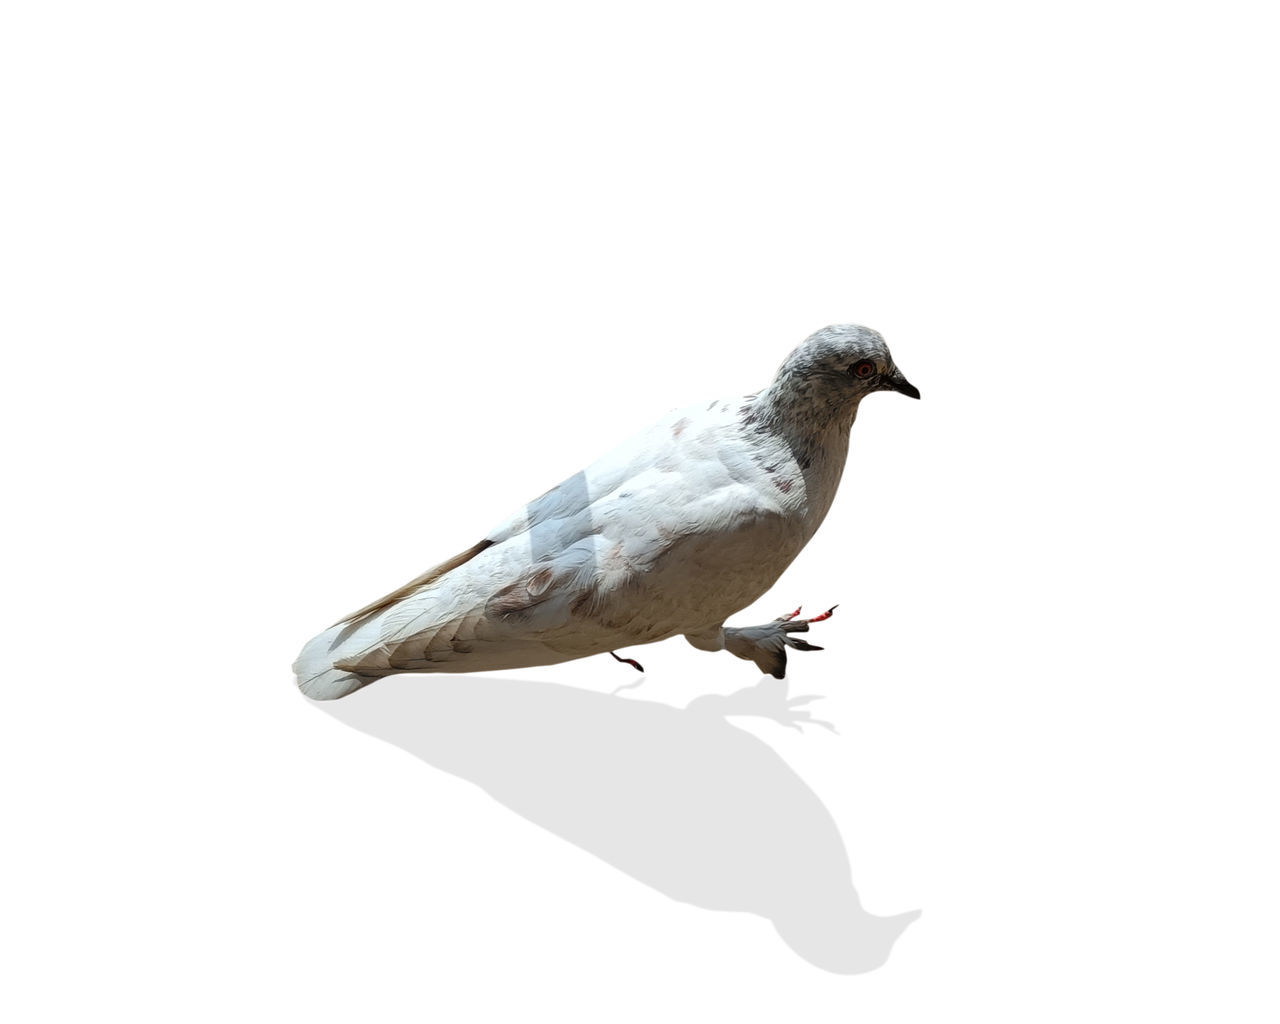 animal themes, animal, bird, animal wildlife, wildlife, one animal, white background, perching, stock dove, copy space, dove - bird, cut out, no people, nature, pigeons and doves, full length, side view, white, wing, outdoors